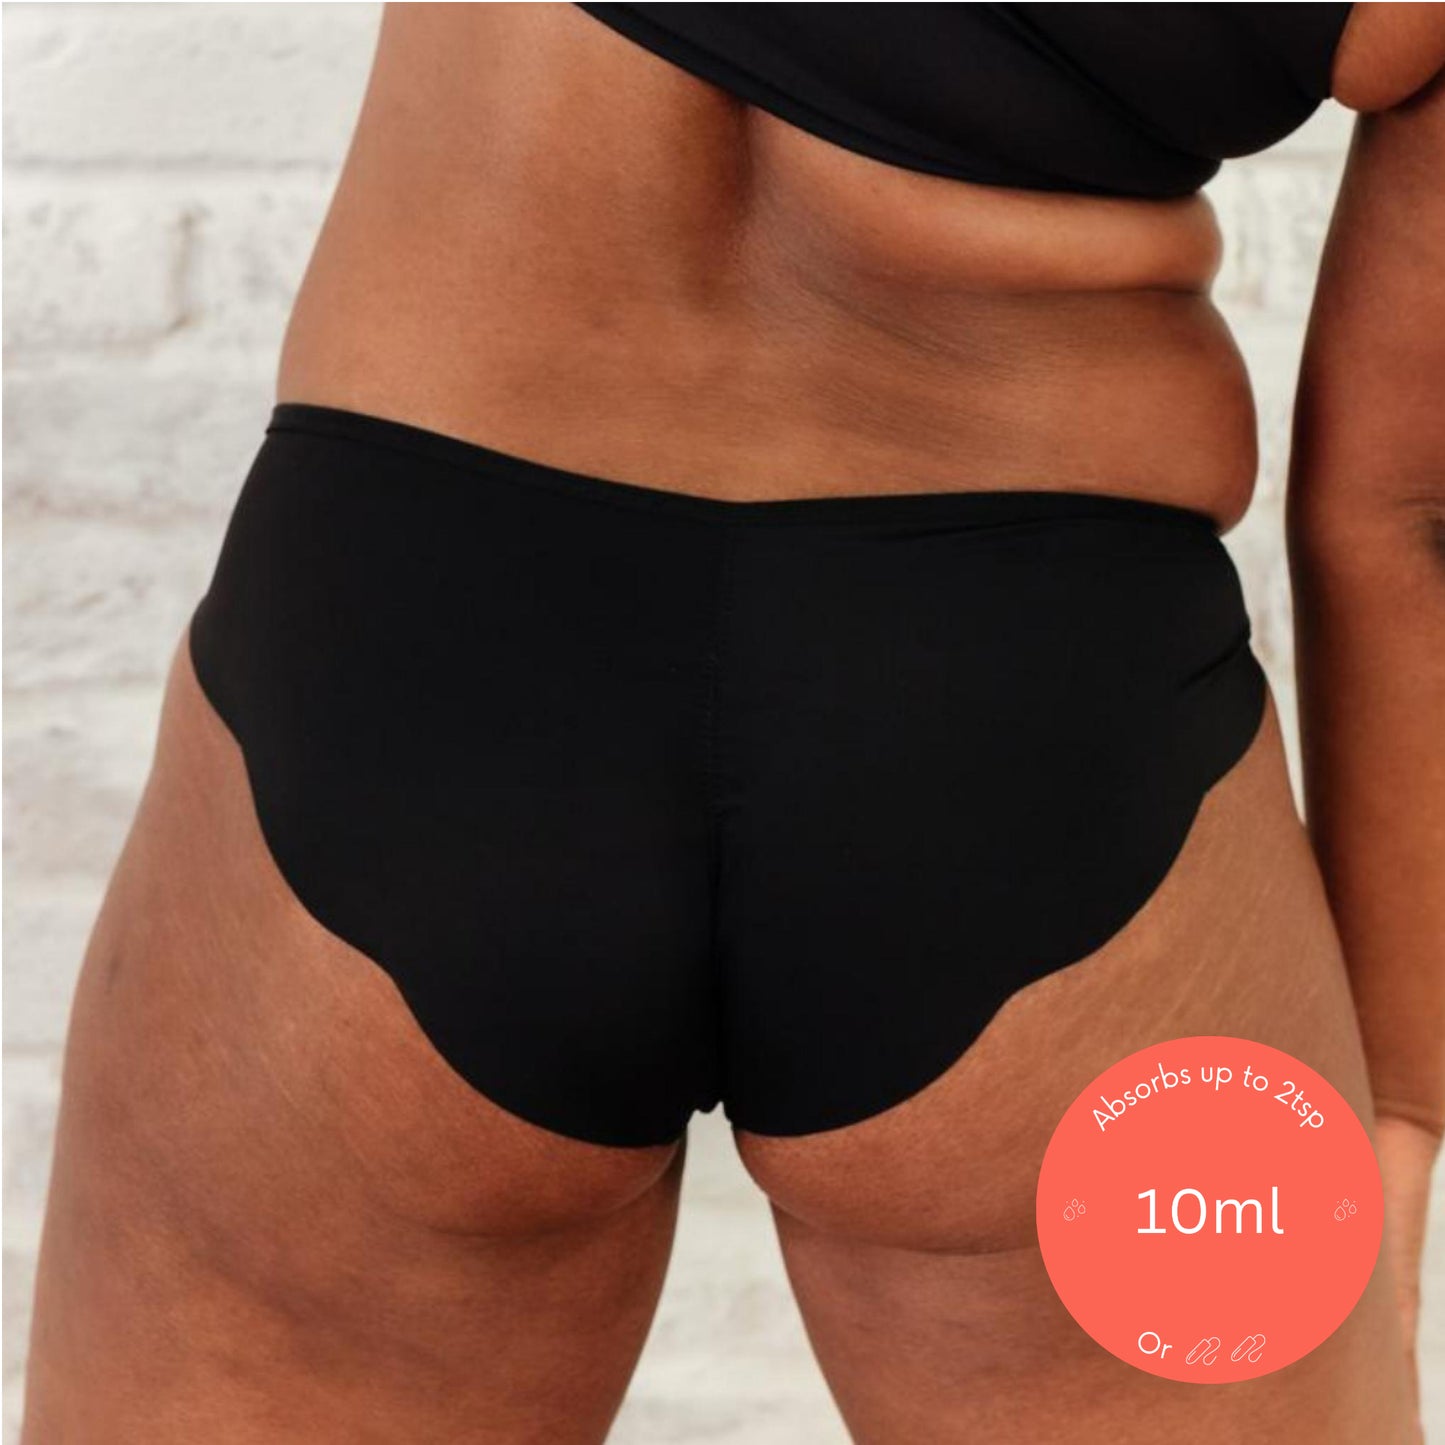 NIXI Body Incontinence and Period Underwear: Keeping You Leak